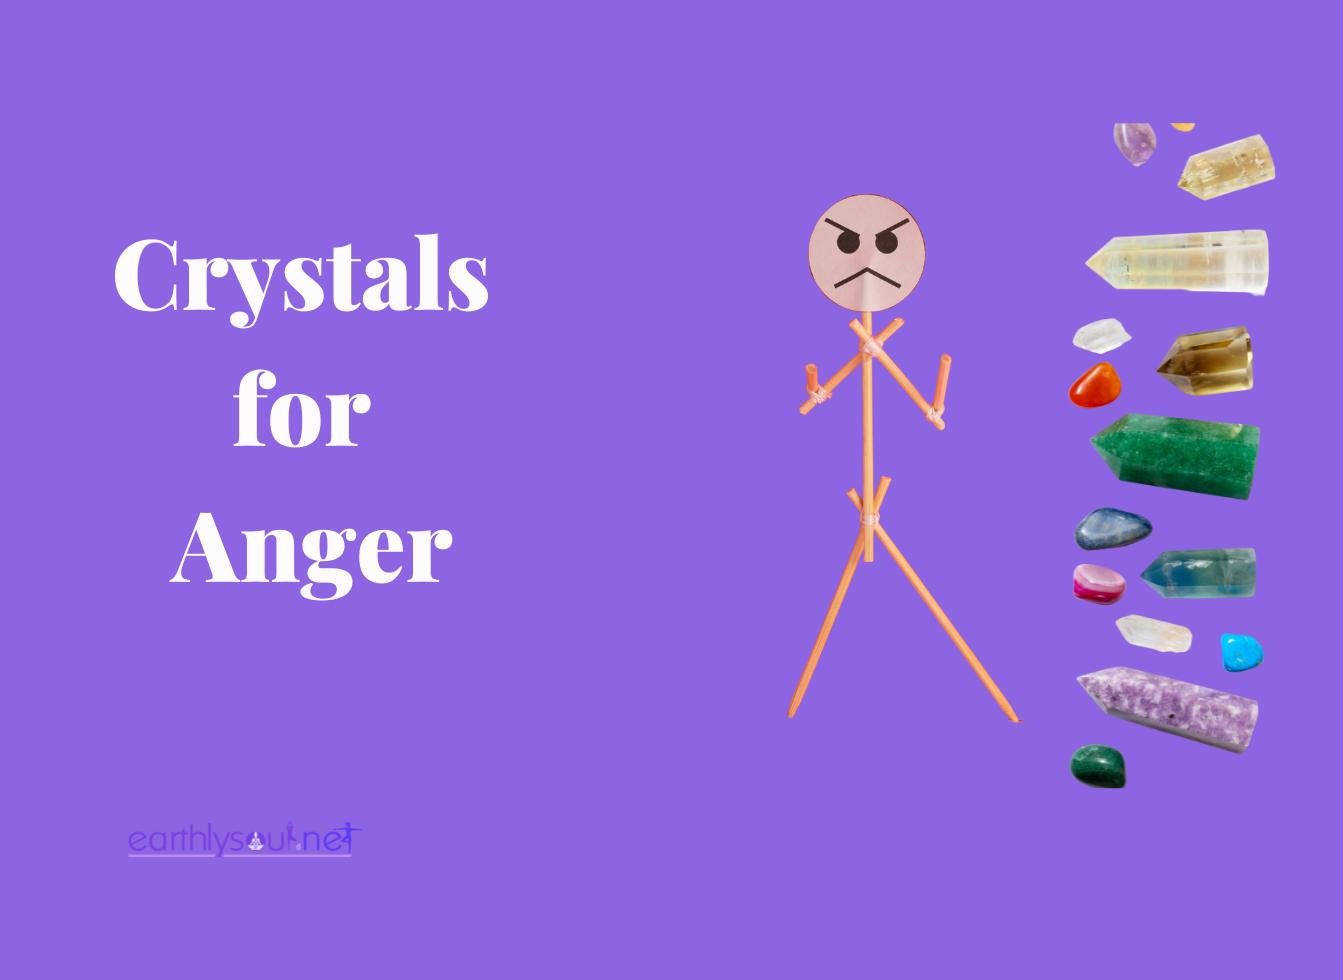 Crystals for anger featured image